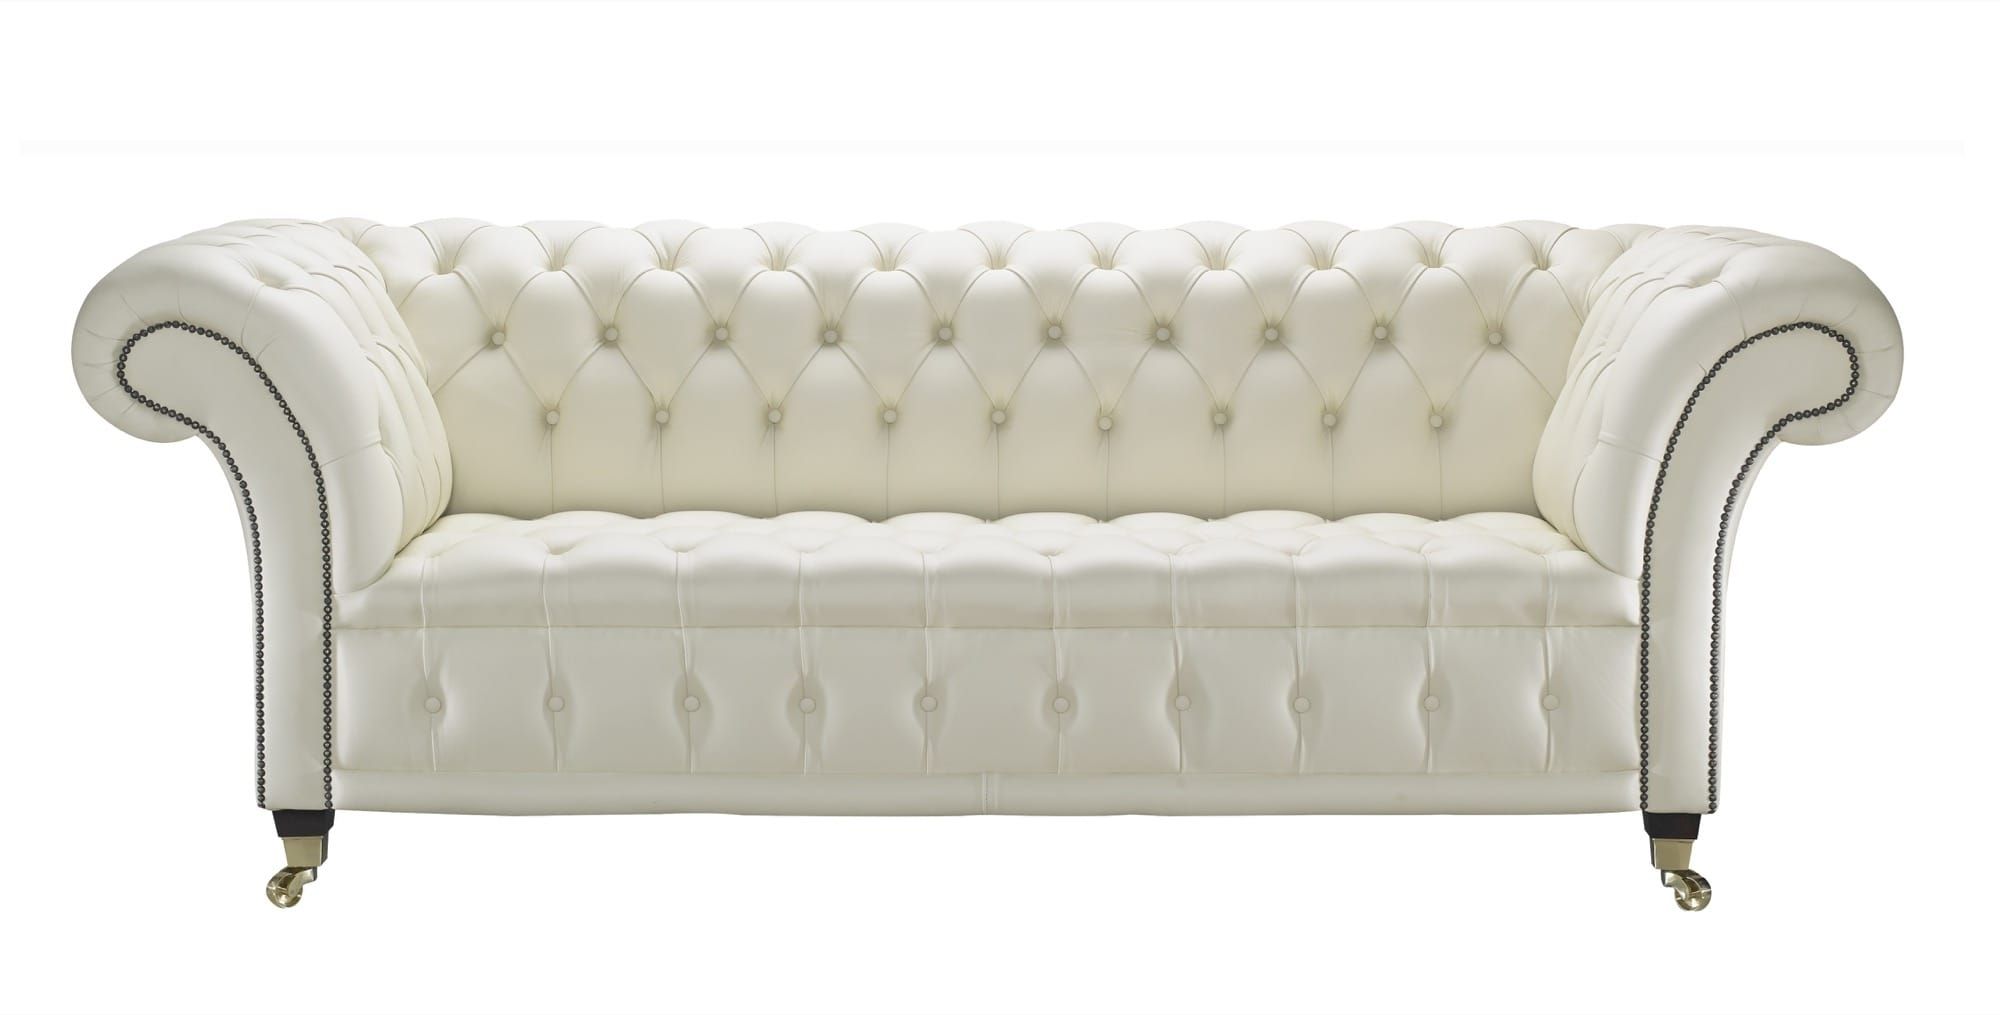 Chesterfield Sofas Within Most Up To Date Cream Leather Chesterfield Sofa, Handcrafted In The Uk (View 18 of 20)